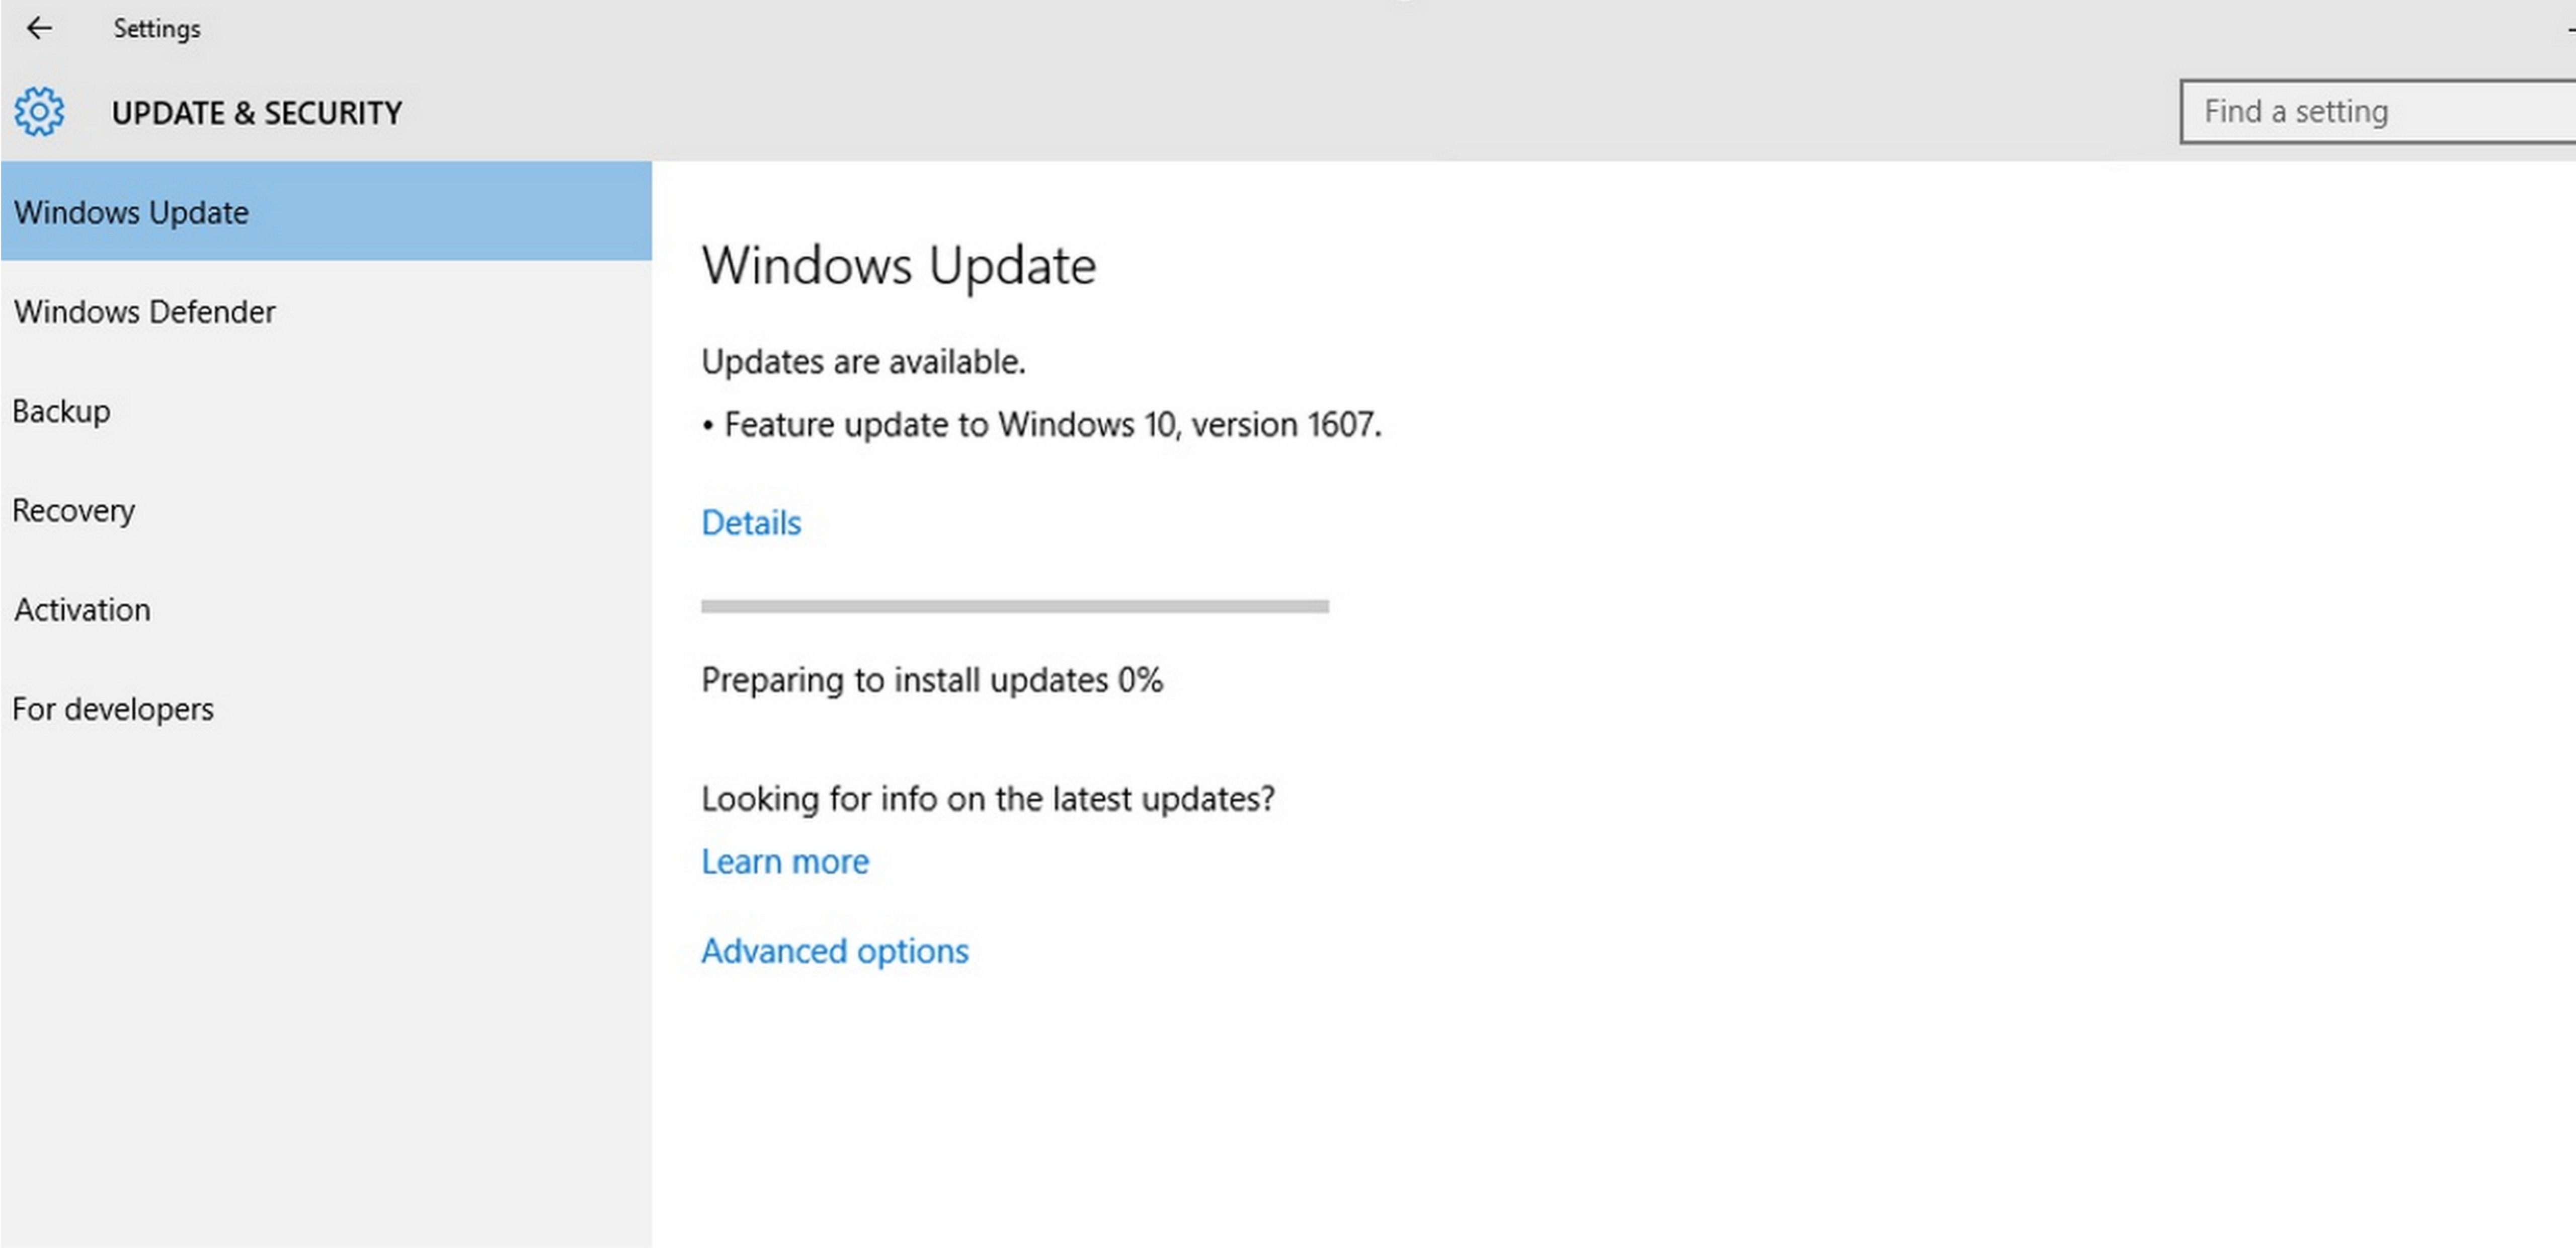 Click on Check for updates and wait for Windows to search for available updates.
If any updates are found, click on Download and install.